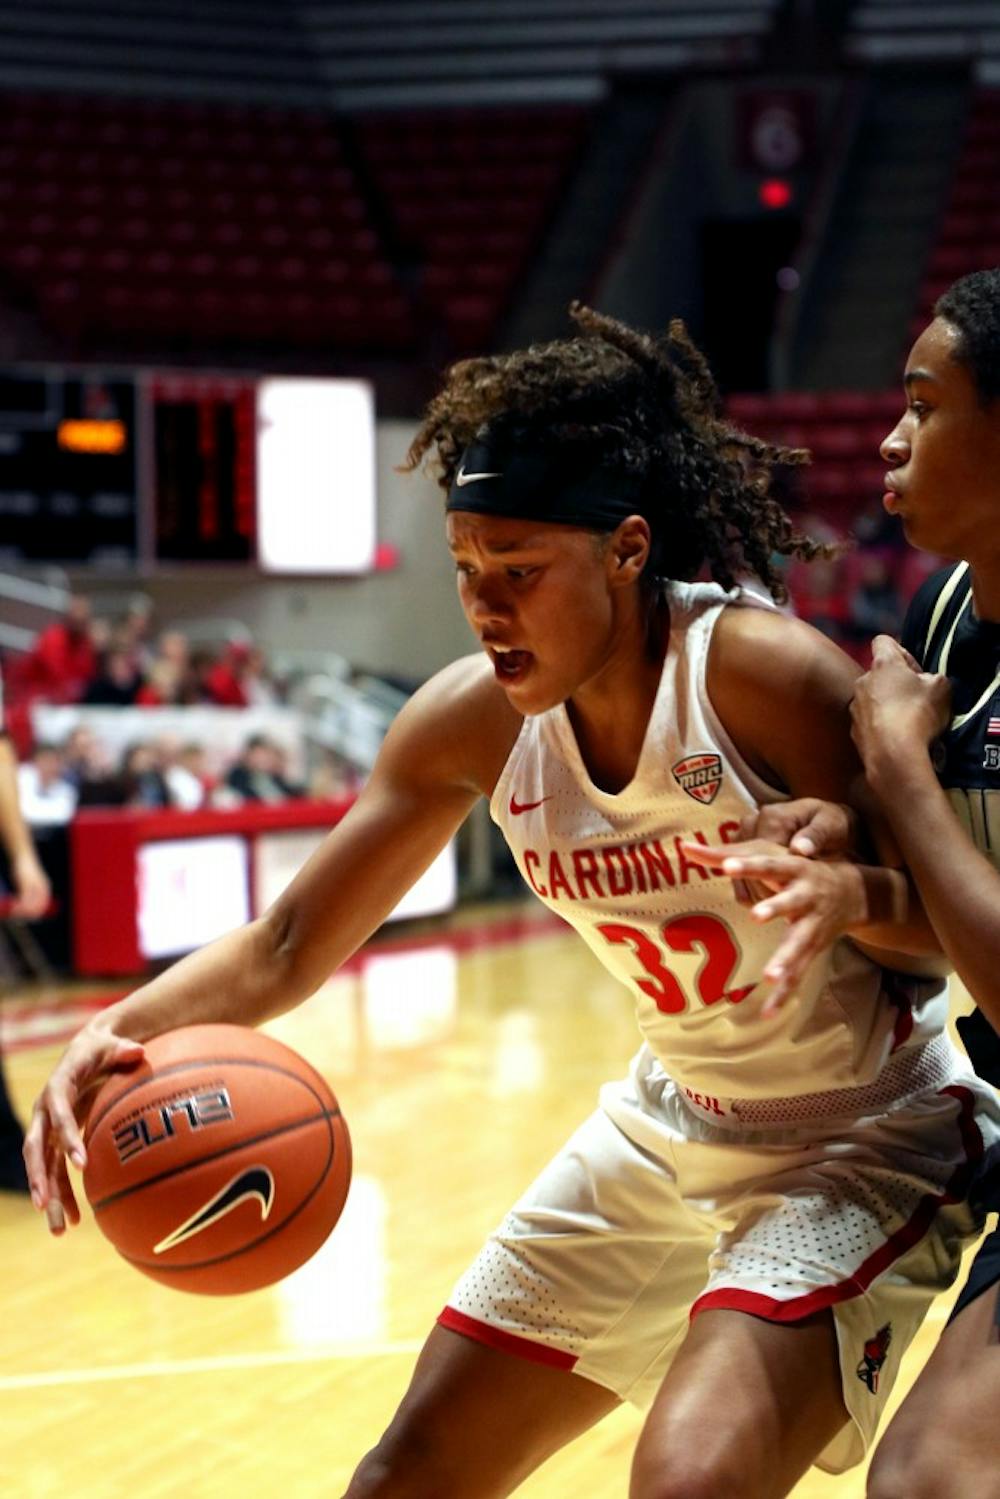 <p>Sophomore forward Oshlynn Brown attempts to score at the Ball State vs Purdue Women's Basketball game Wednesday, Nov. 7 at John E. Worthen Arena. Brown had 11 points against the Boilermakers. <strong>Jacob Haberstroh,DN</strong></p>